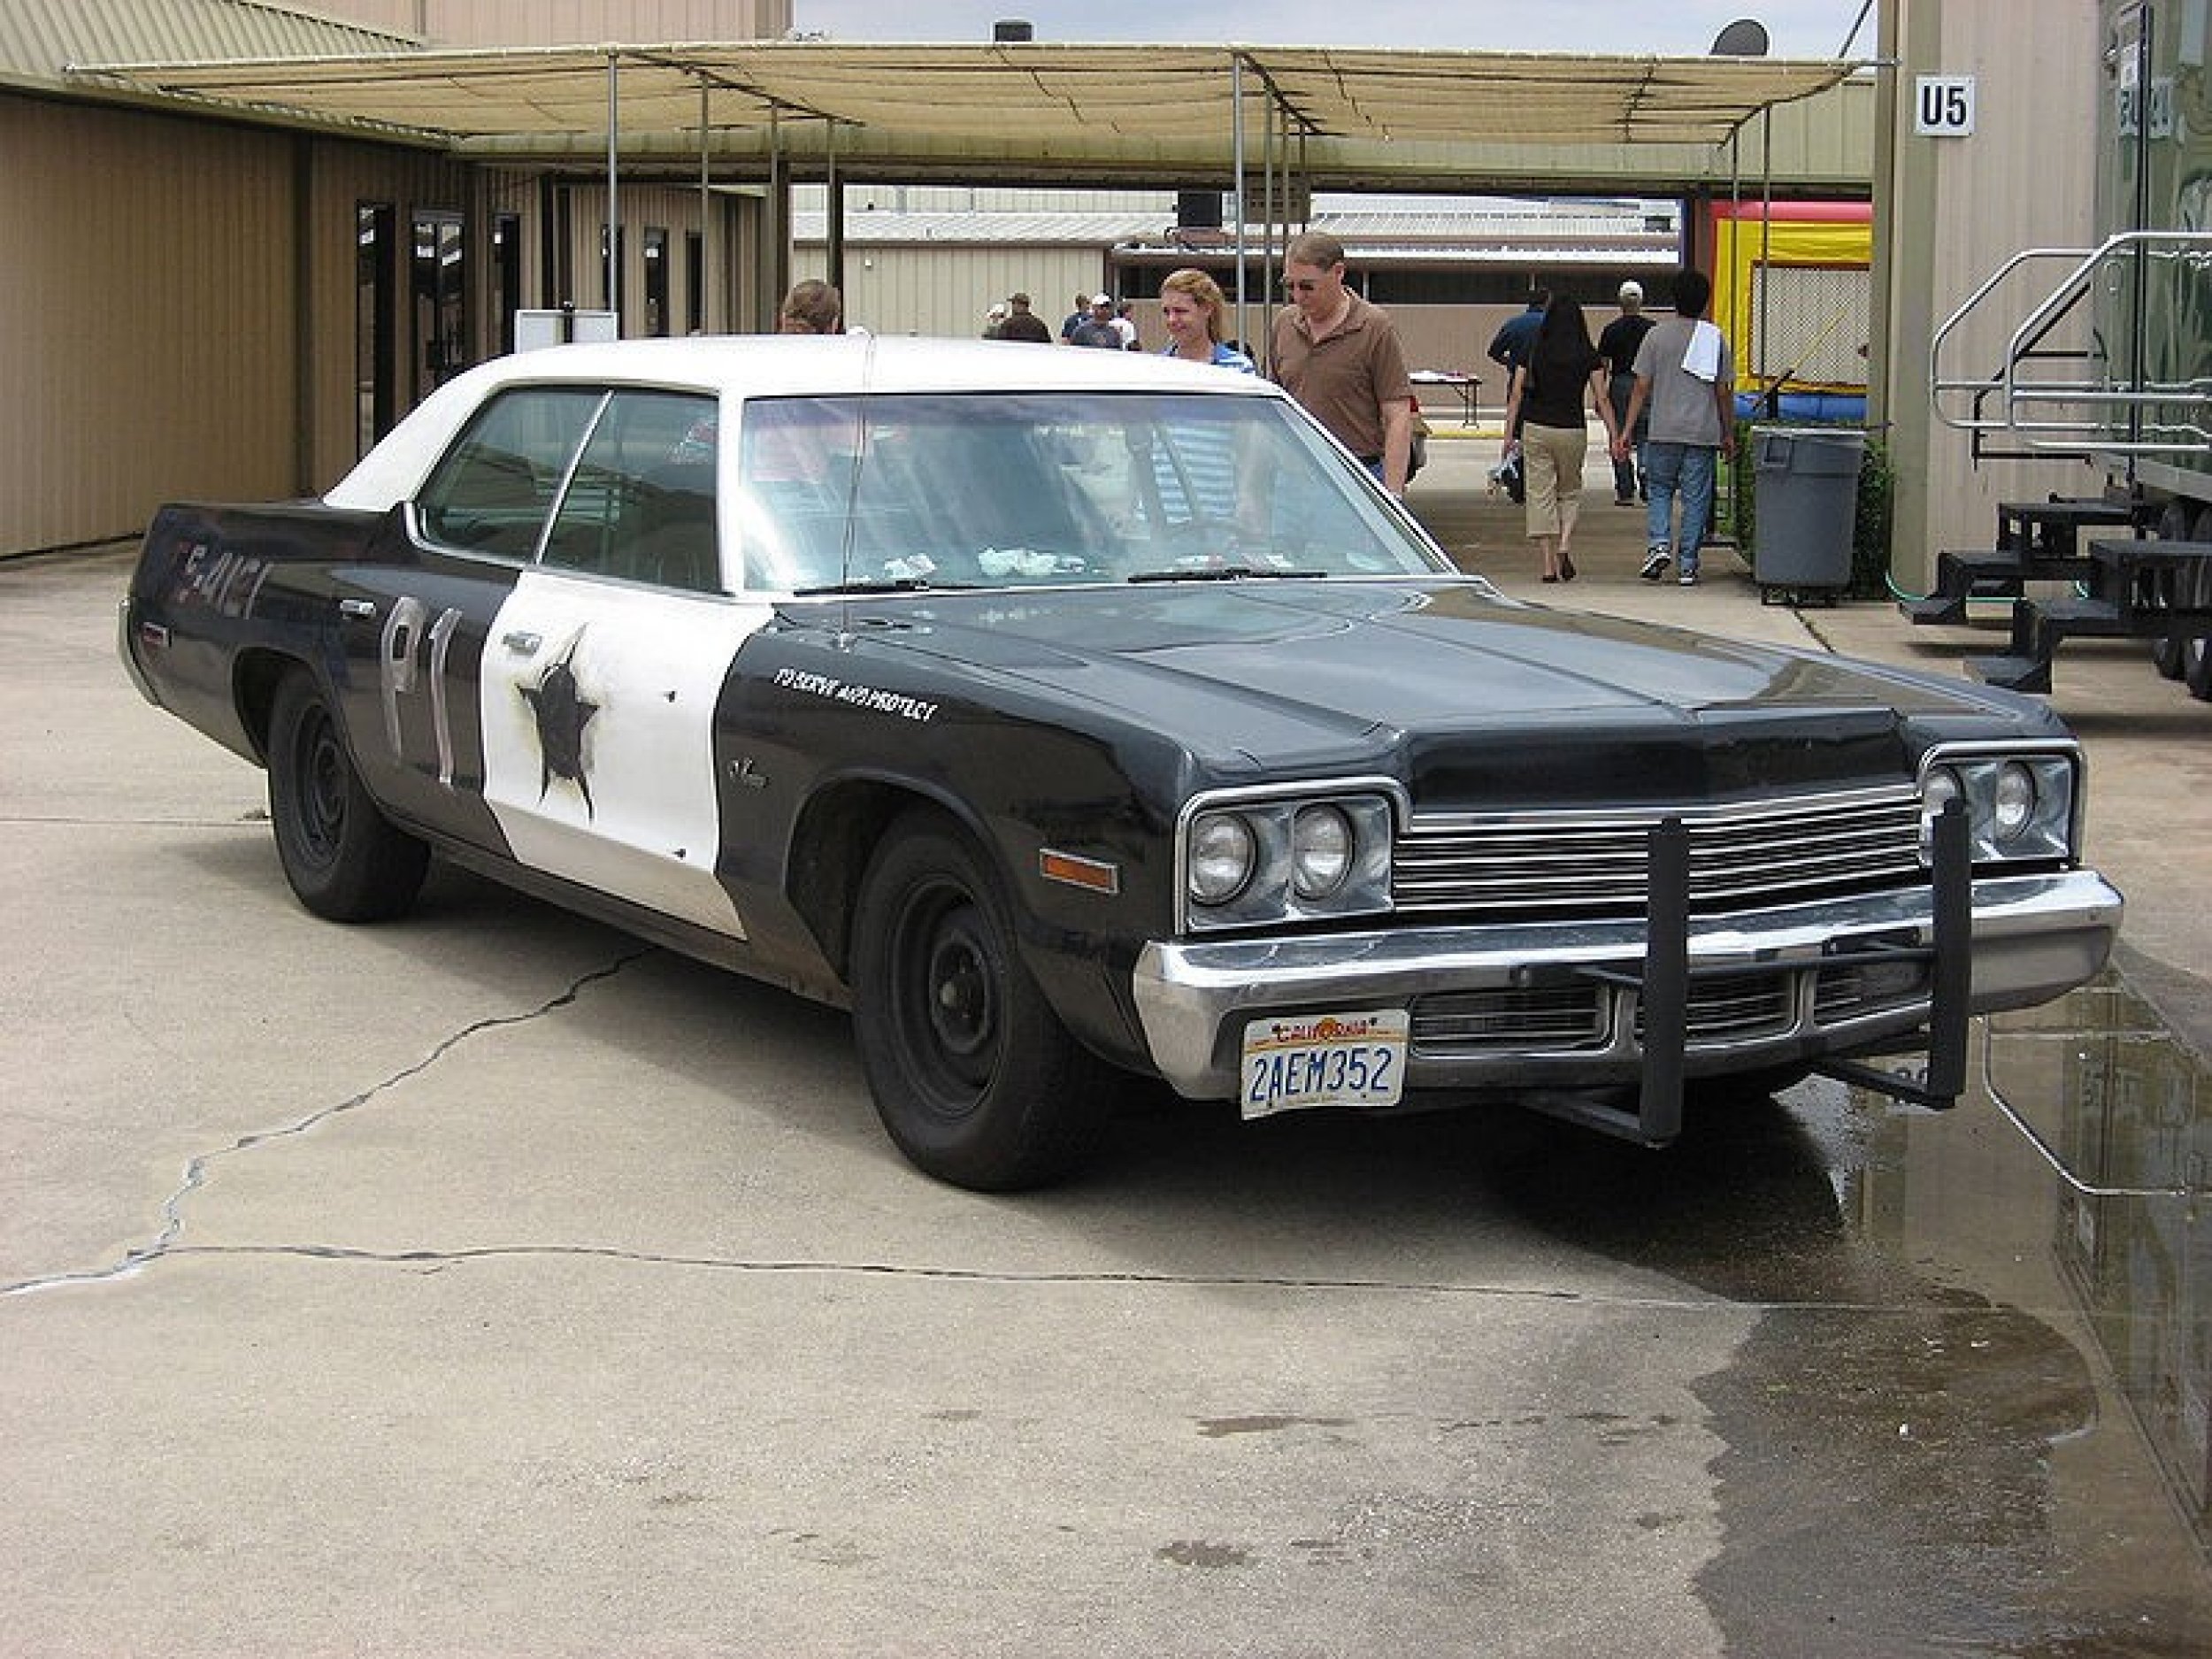 5The Bluesmobile from The Blues Brother